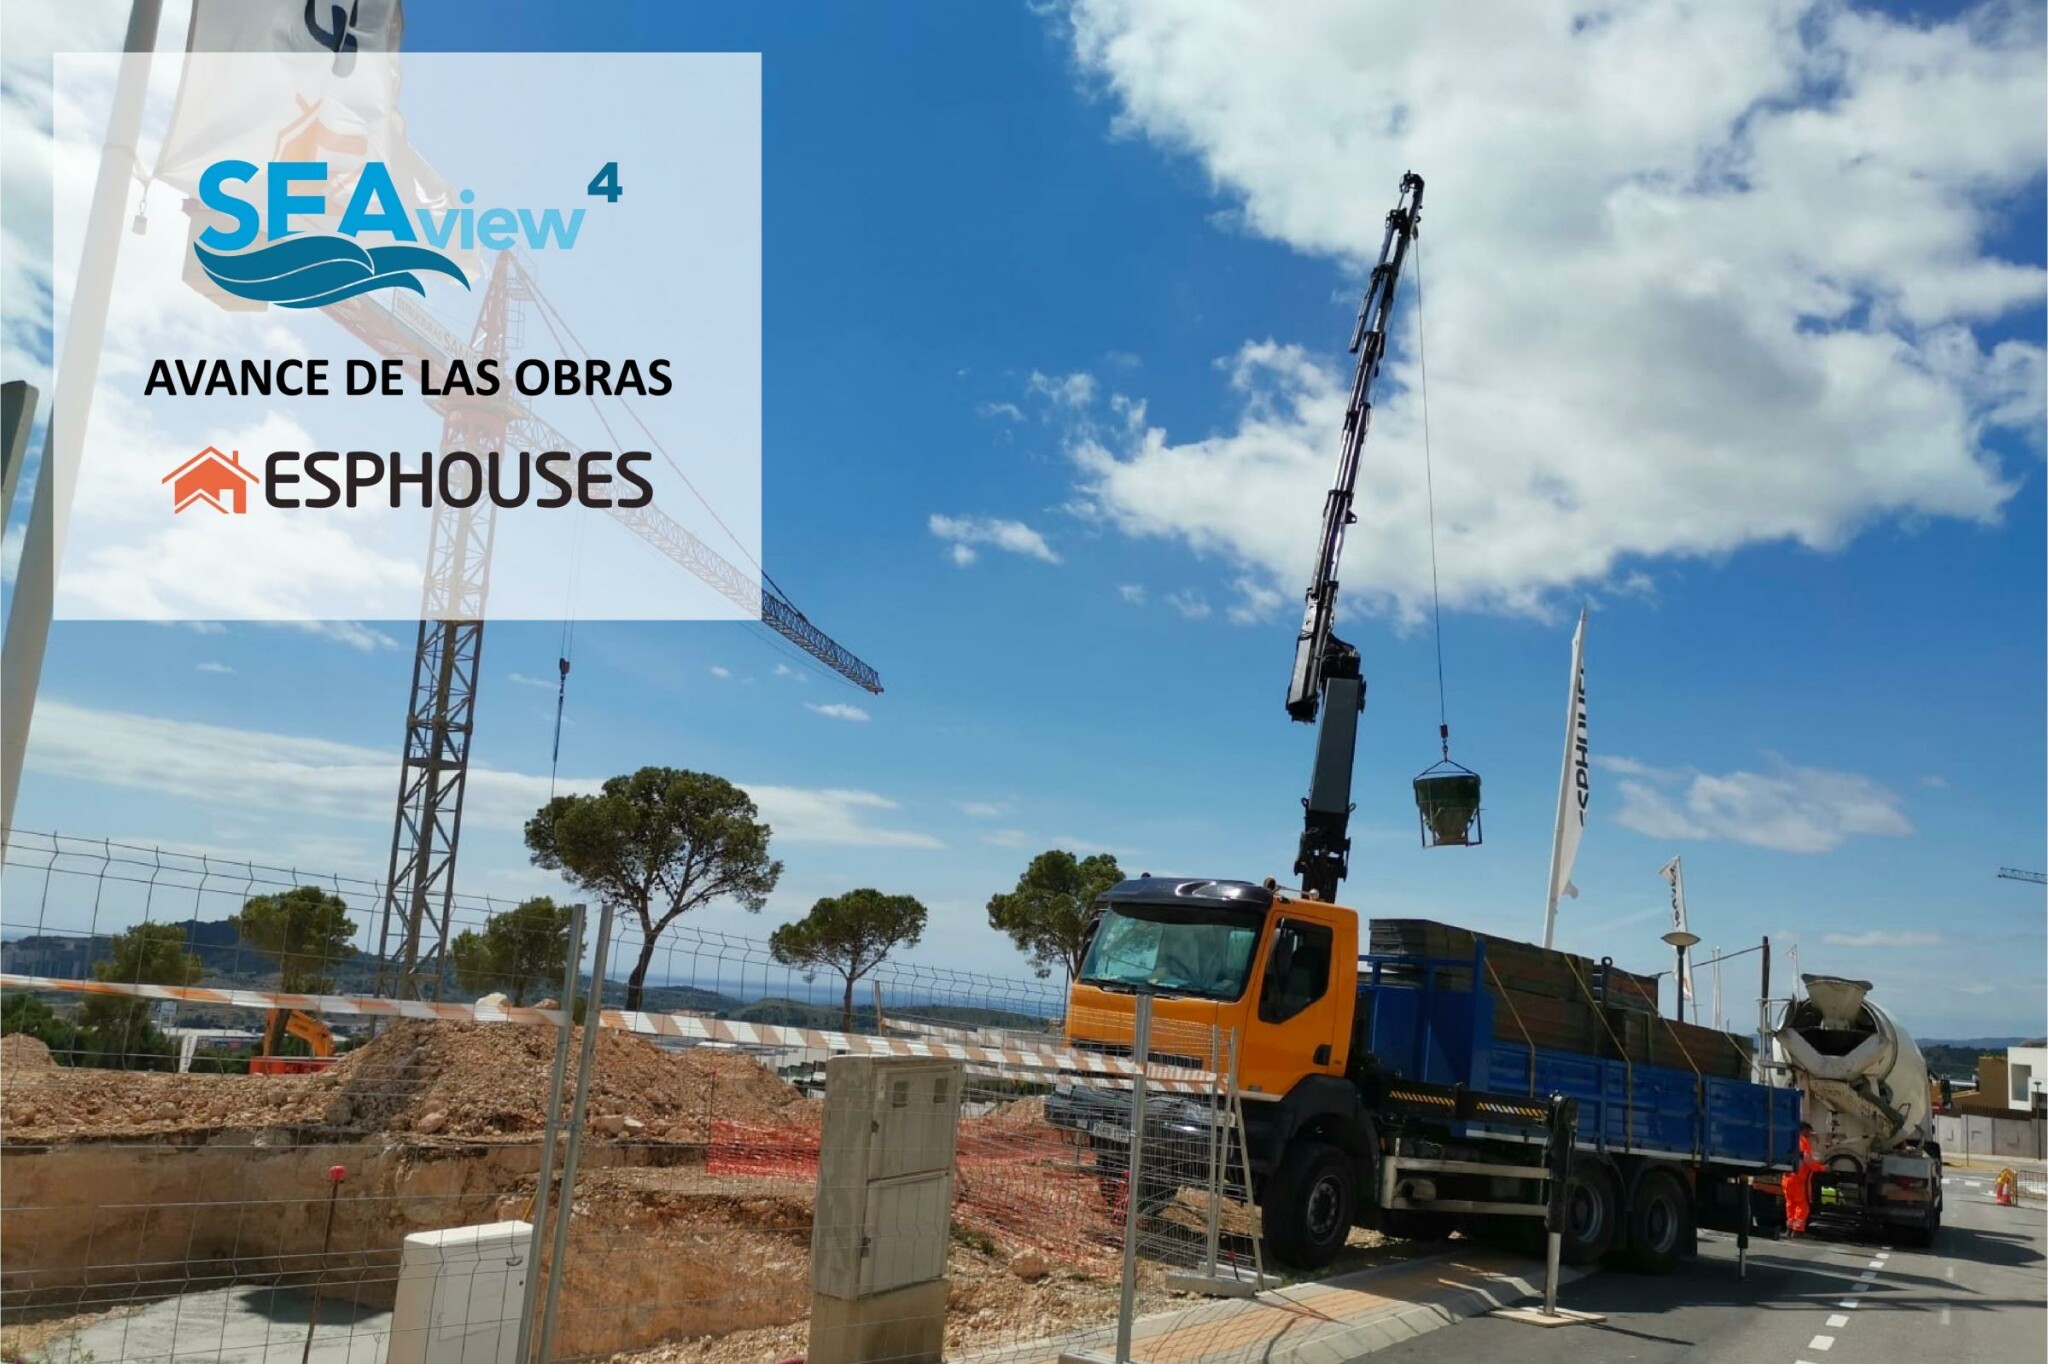 Residencial SEAVIEW 4 - Progress on the construction of our latest development in Sierra Cortina